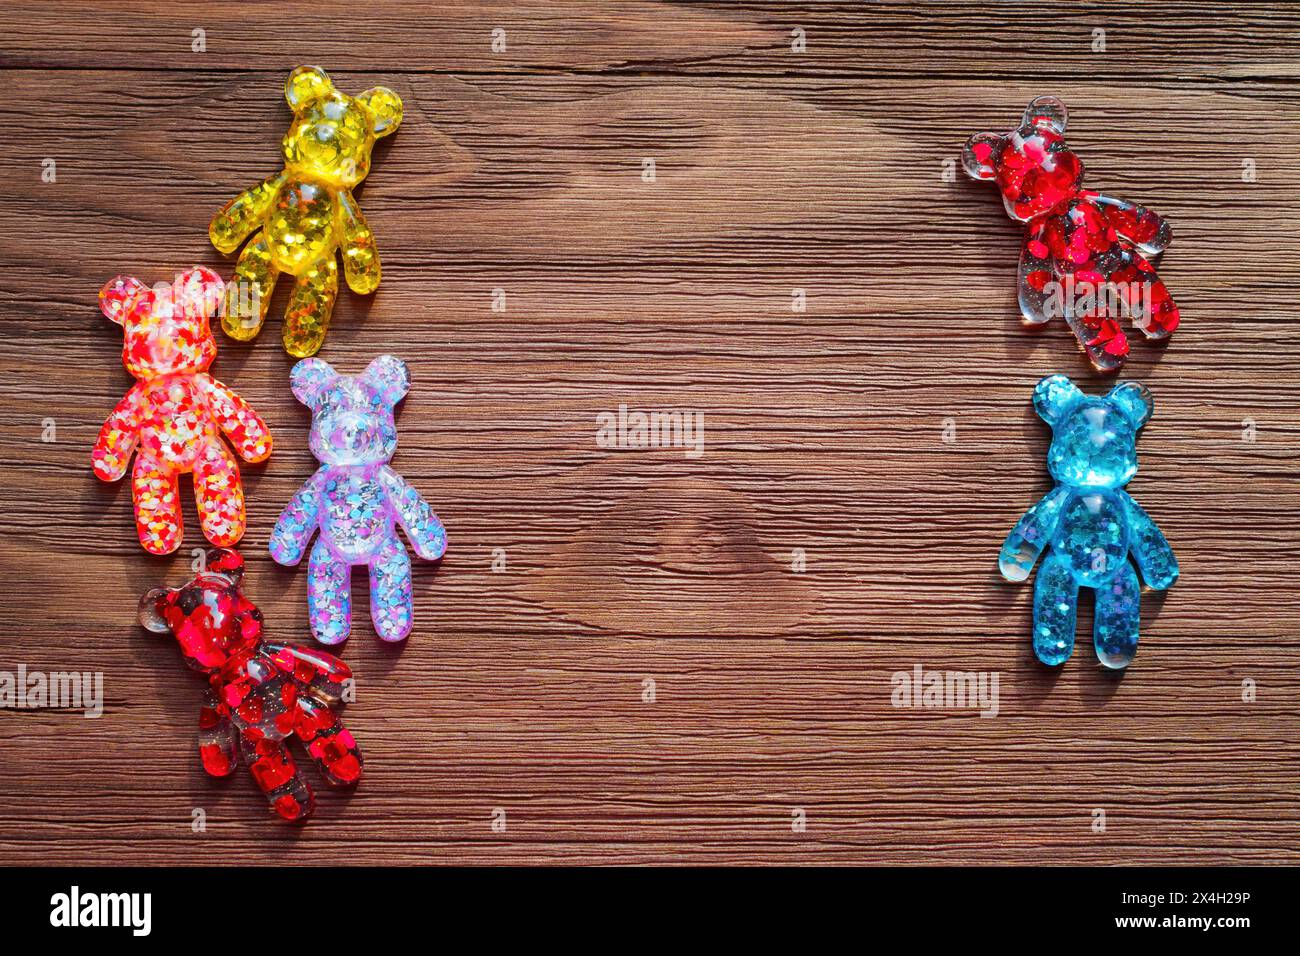 Collection of colorful bear figurines filled with hearts and glitter, arranged on a rustic wooden background, framing some space for text, personalize Stock Photo